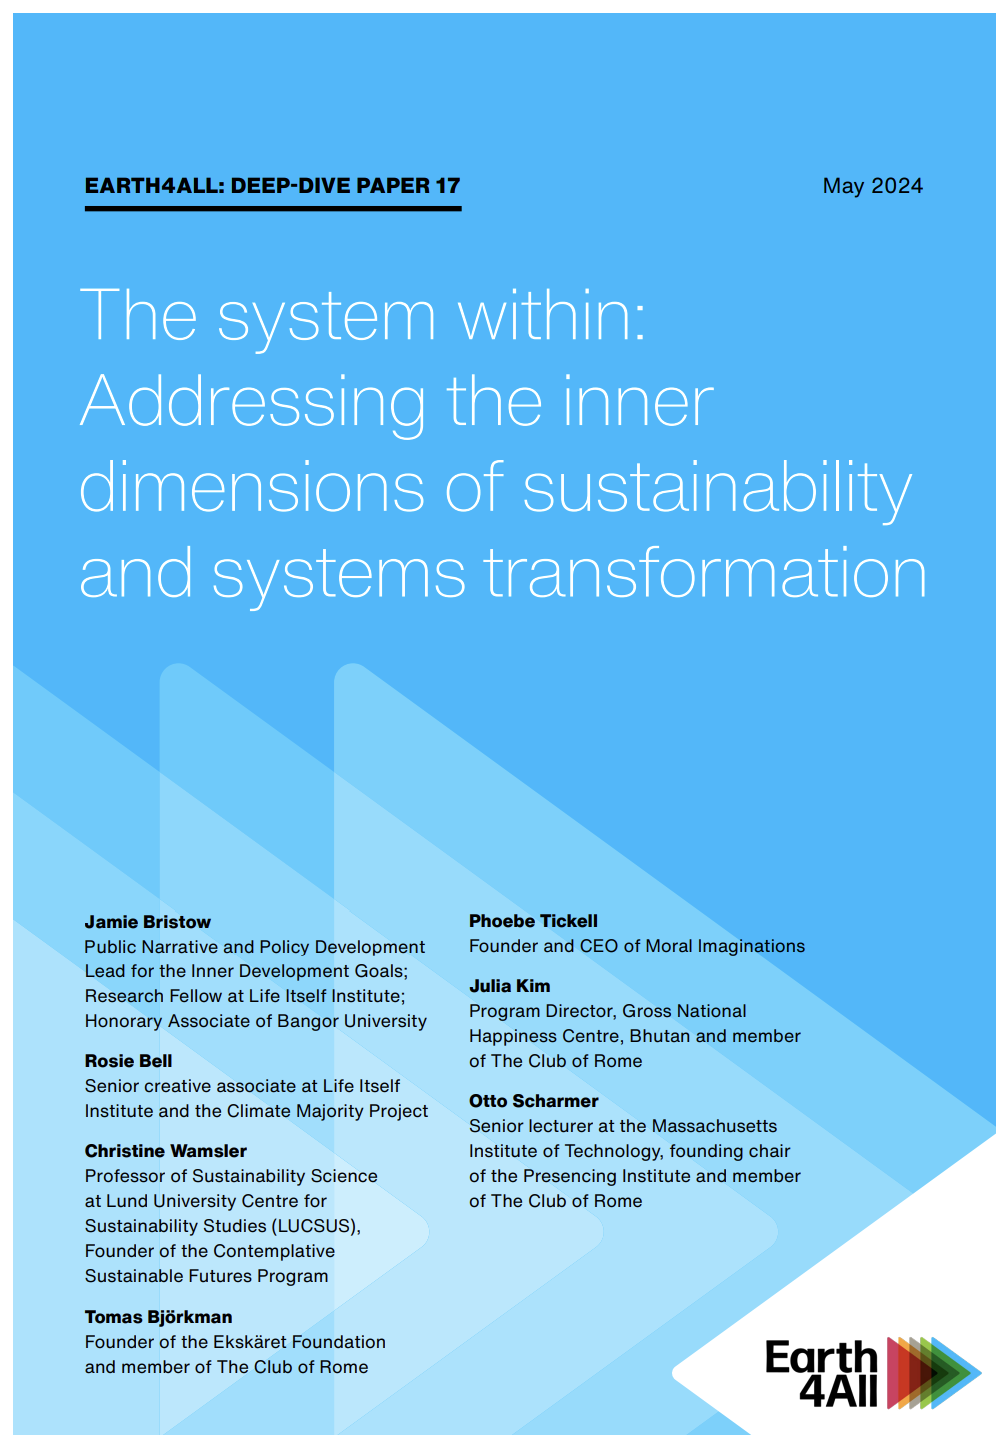 The system within: Addressing the inner dimensions of sustainability and systems transformation